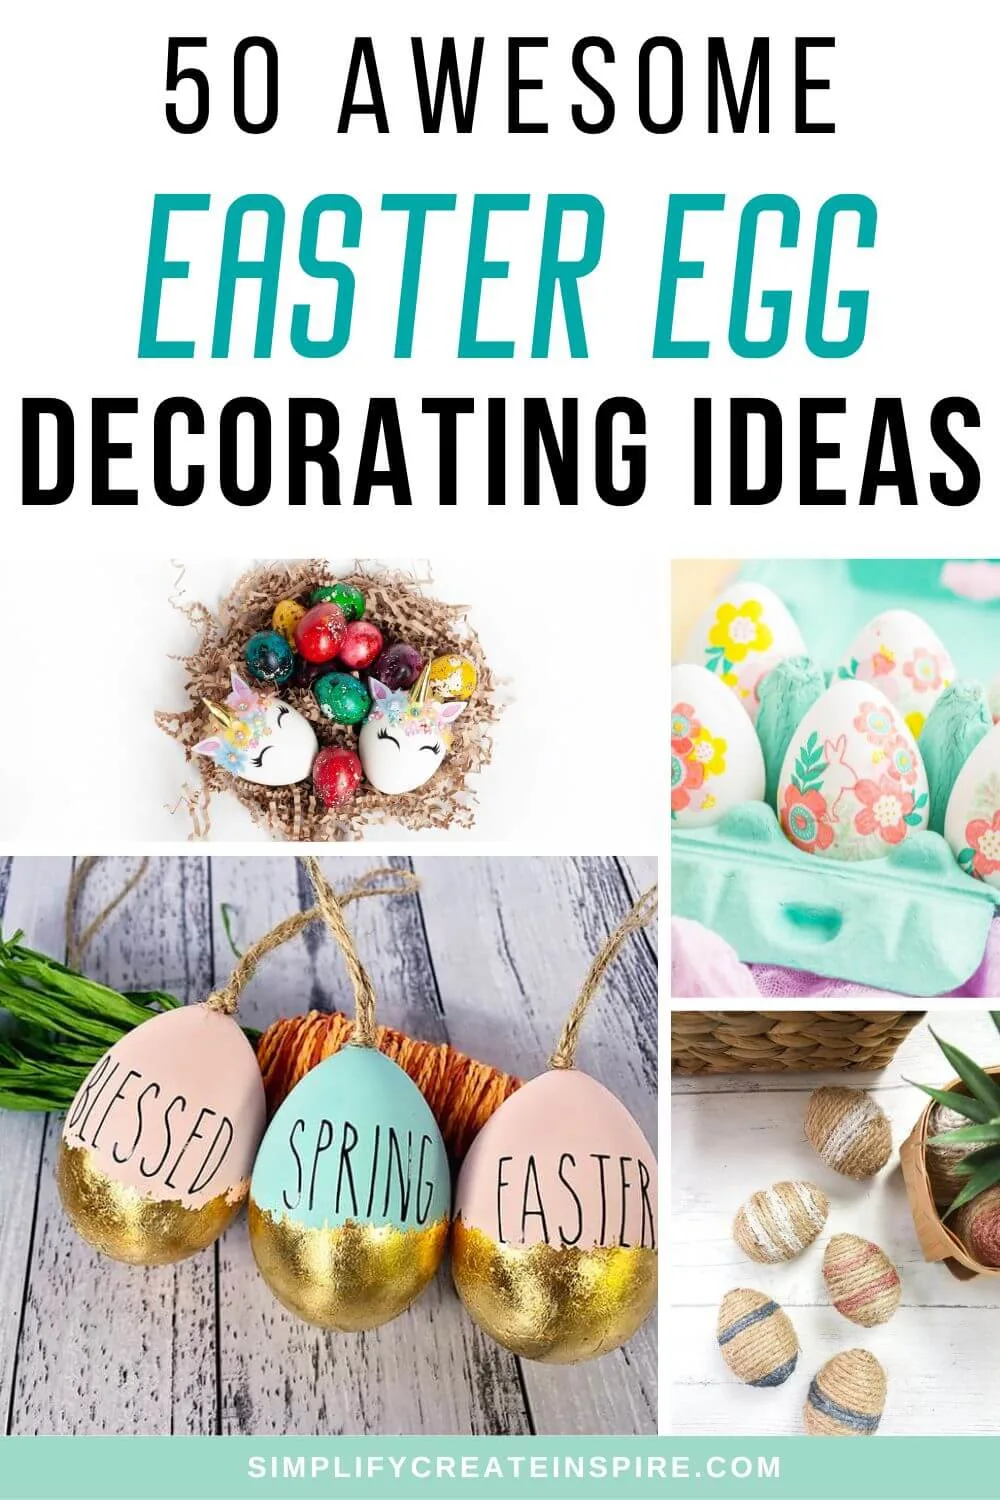 Pinterest image - text reads 50 awesome easter egg decorating ideas